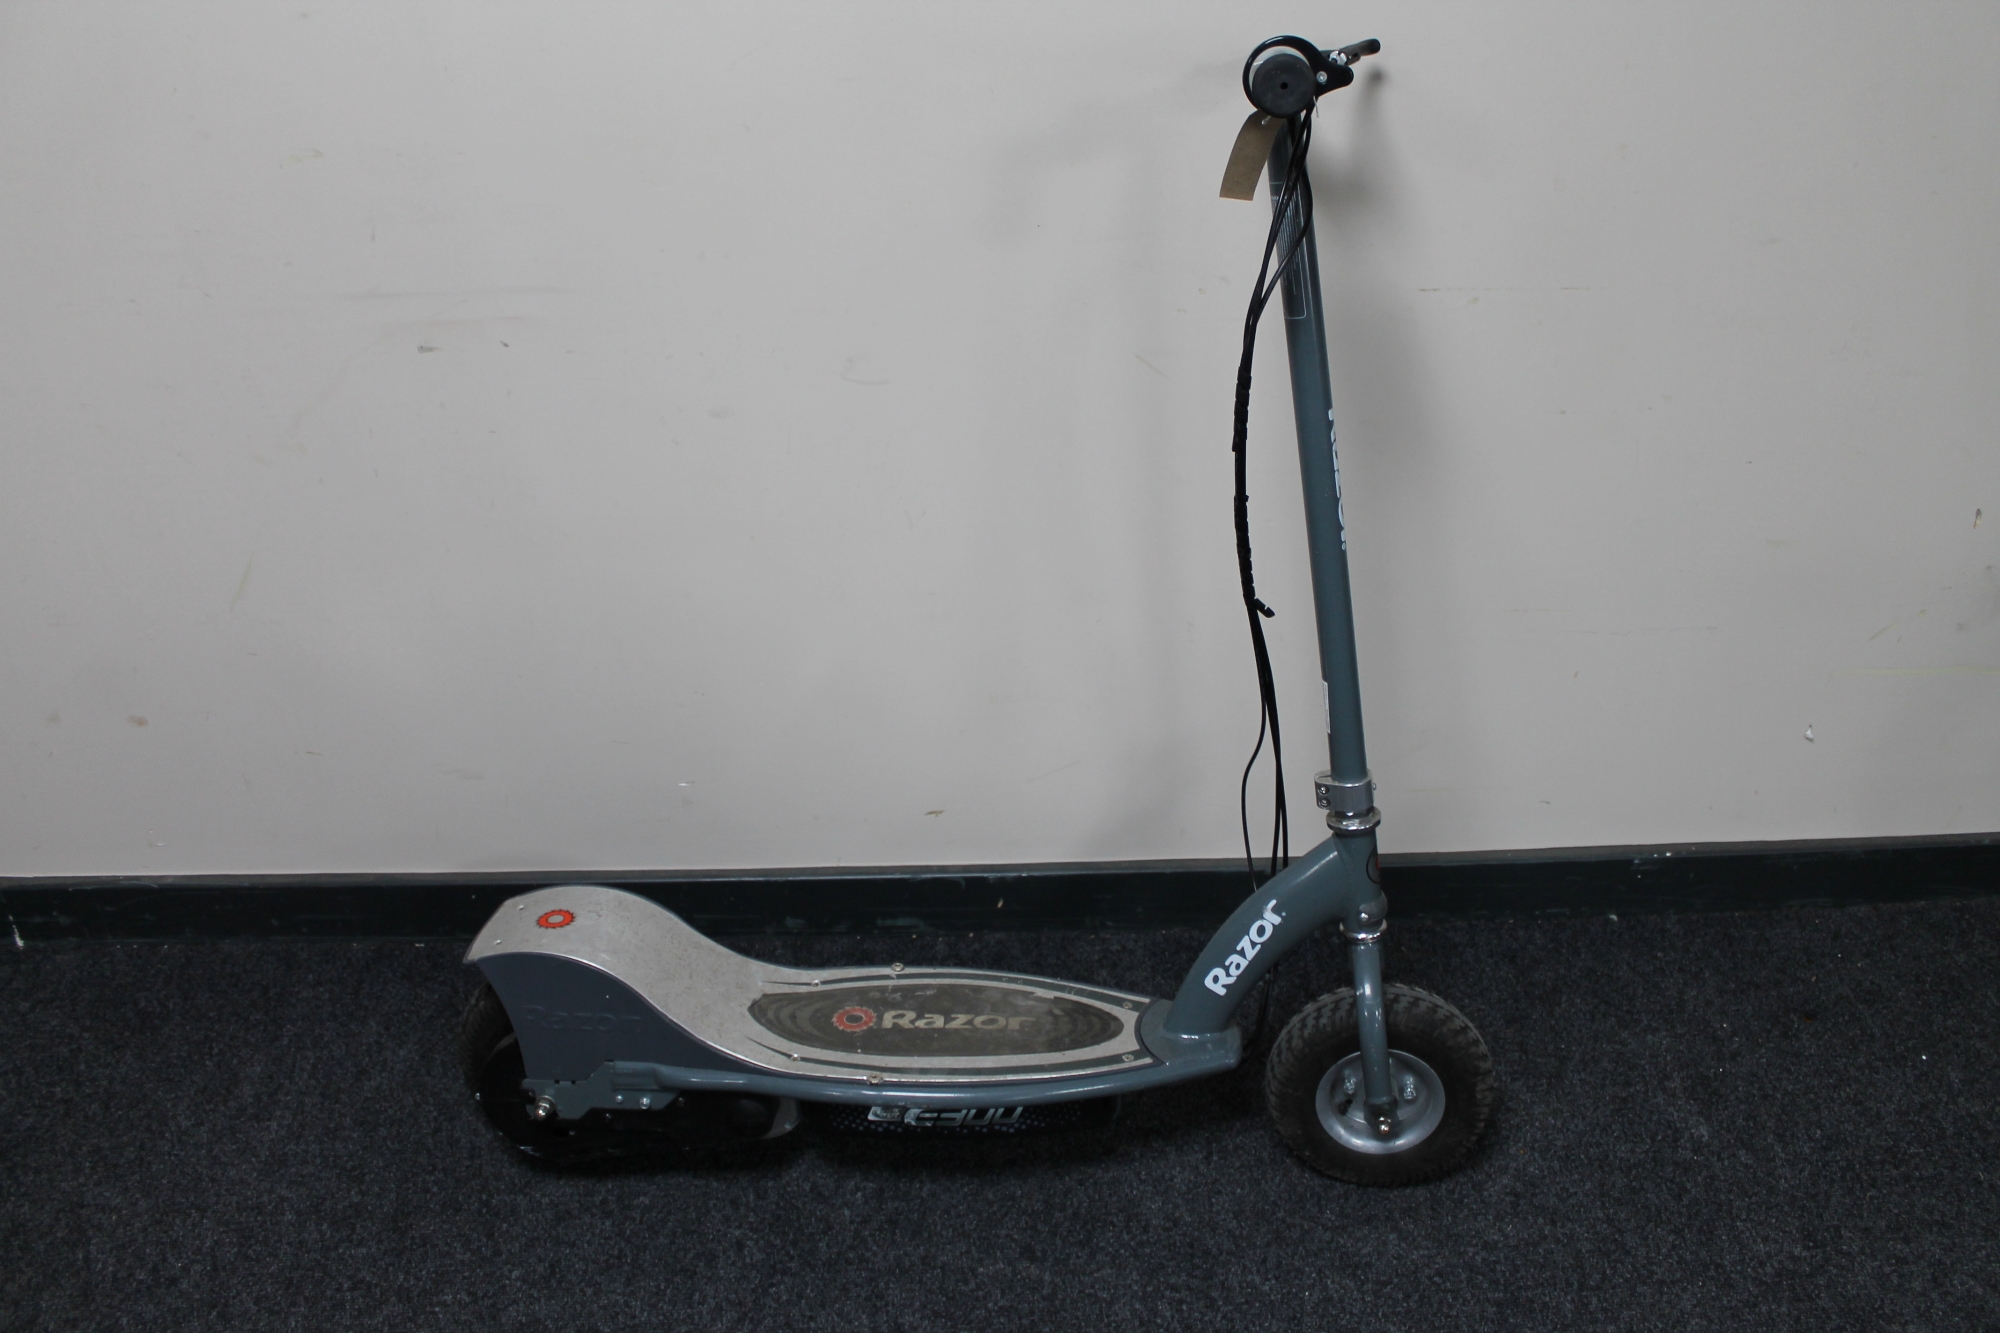 A Razor electric scooter,